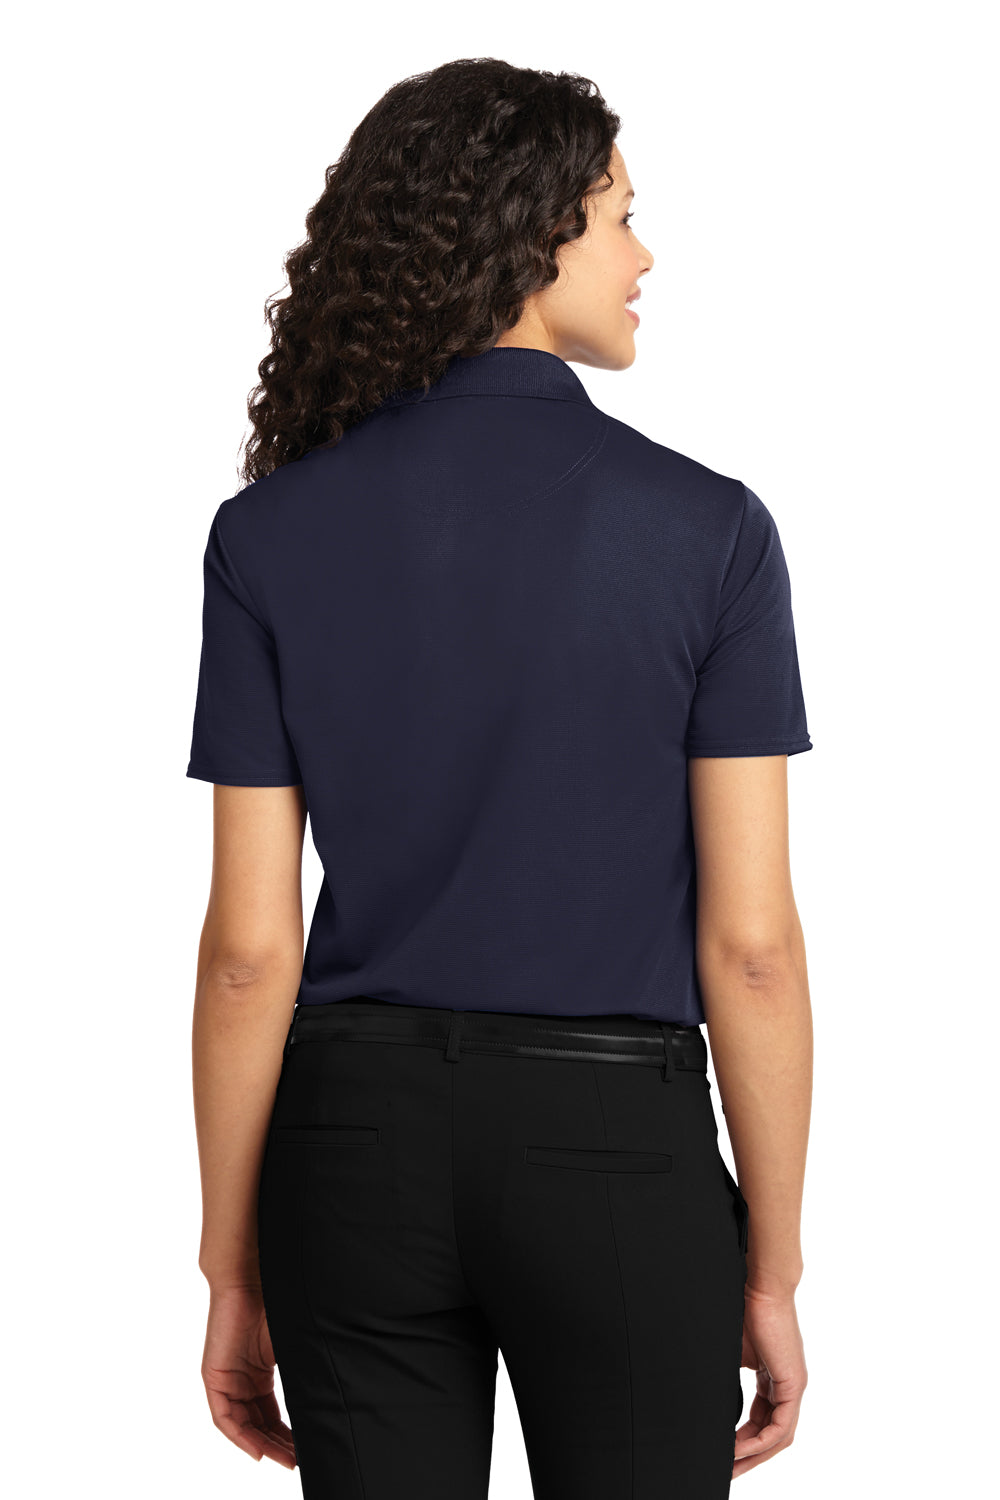 Port Authority L525 Womens Dry Zone Moisture Wicking Short Sleeve Polo Shirt Navy Blue Back